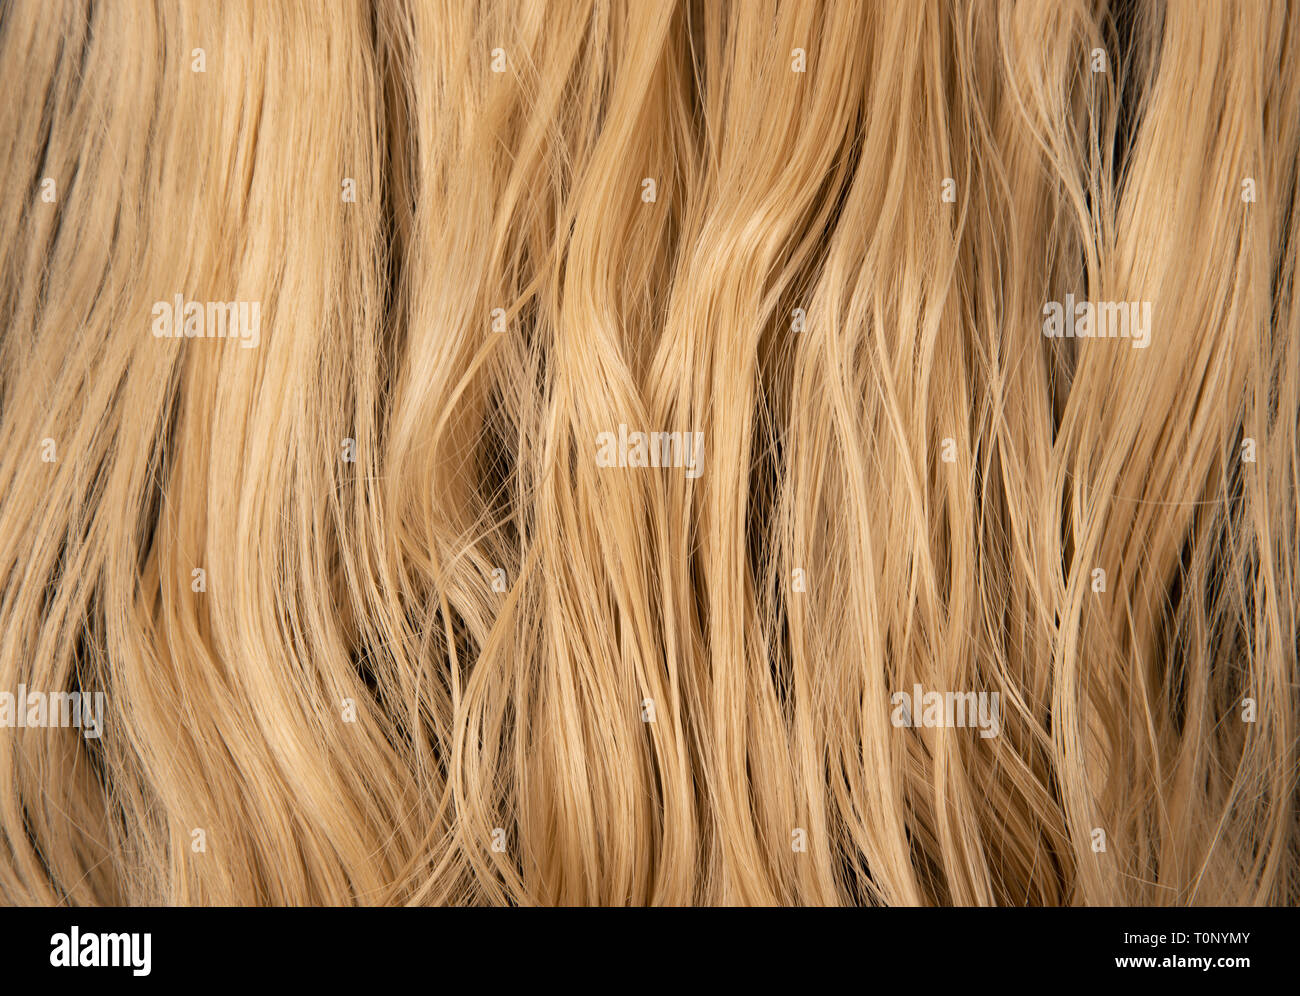 blond auburn long curly hair from the back, slightly wet and wavy. hair extensions style cut and colored in a flow hanging down. beauty high fashion. Stock Photo